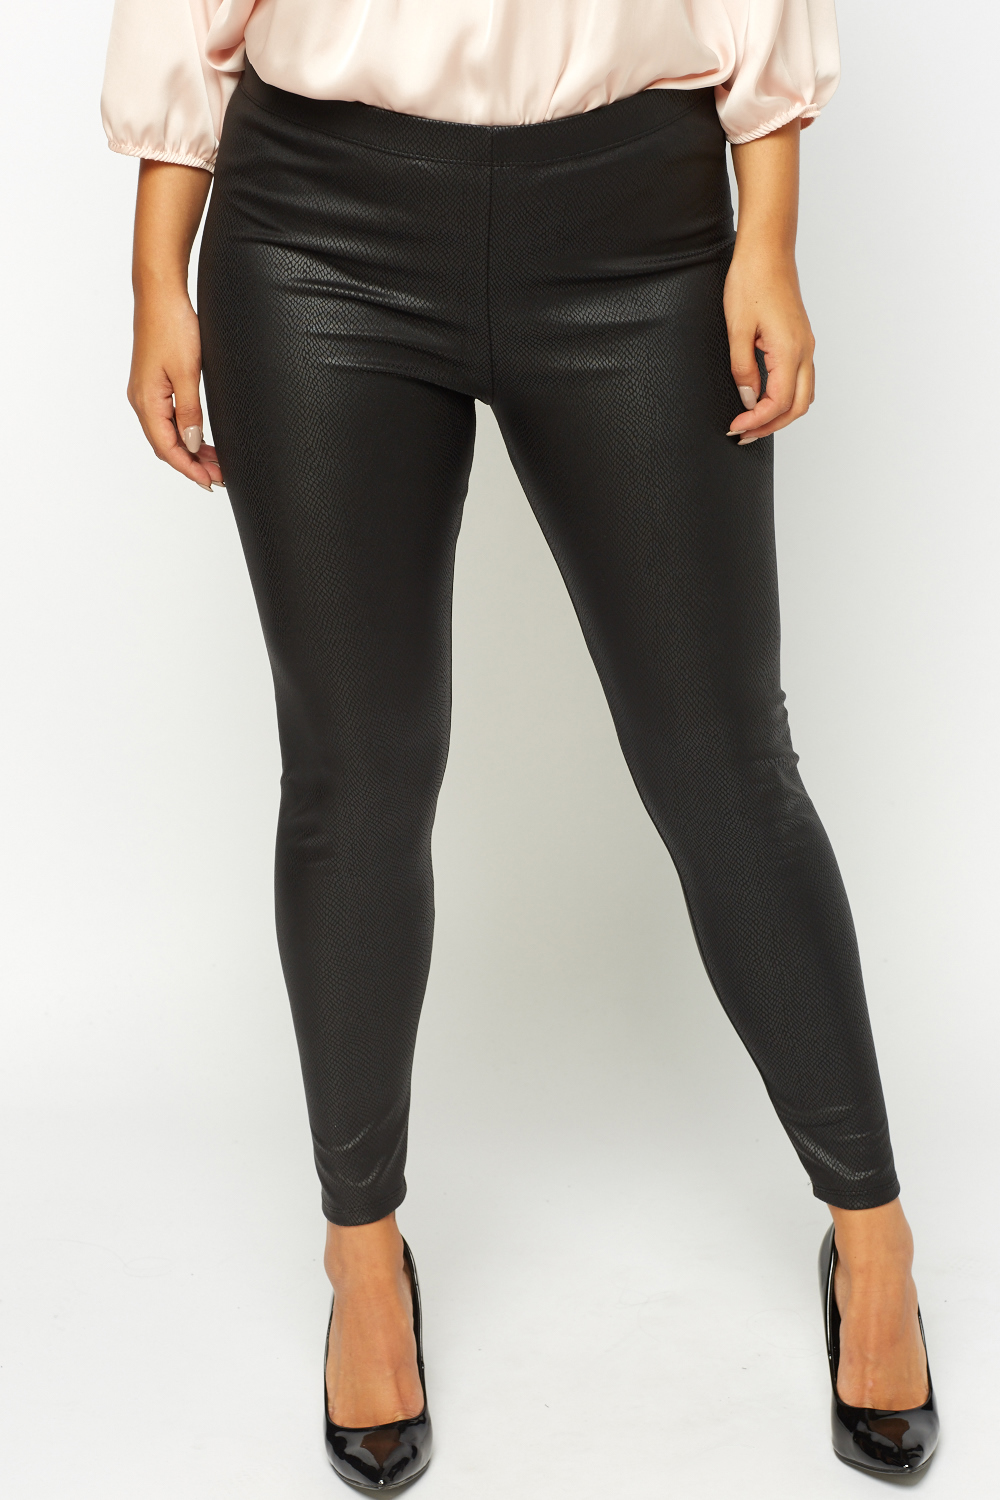 Download Mock Croc Fitted Leggings - Just $6